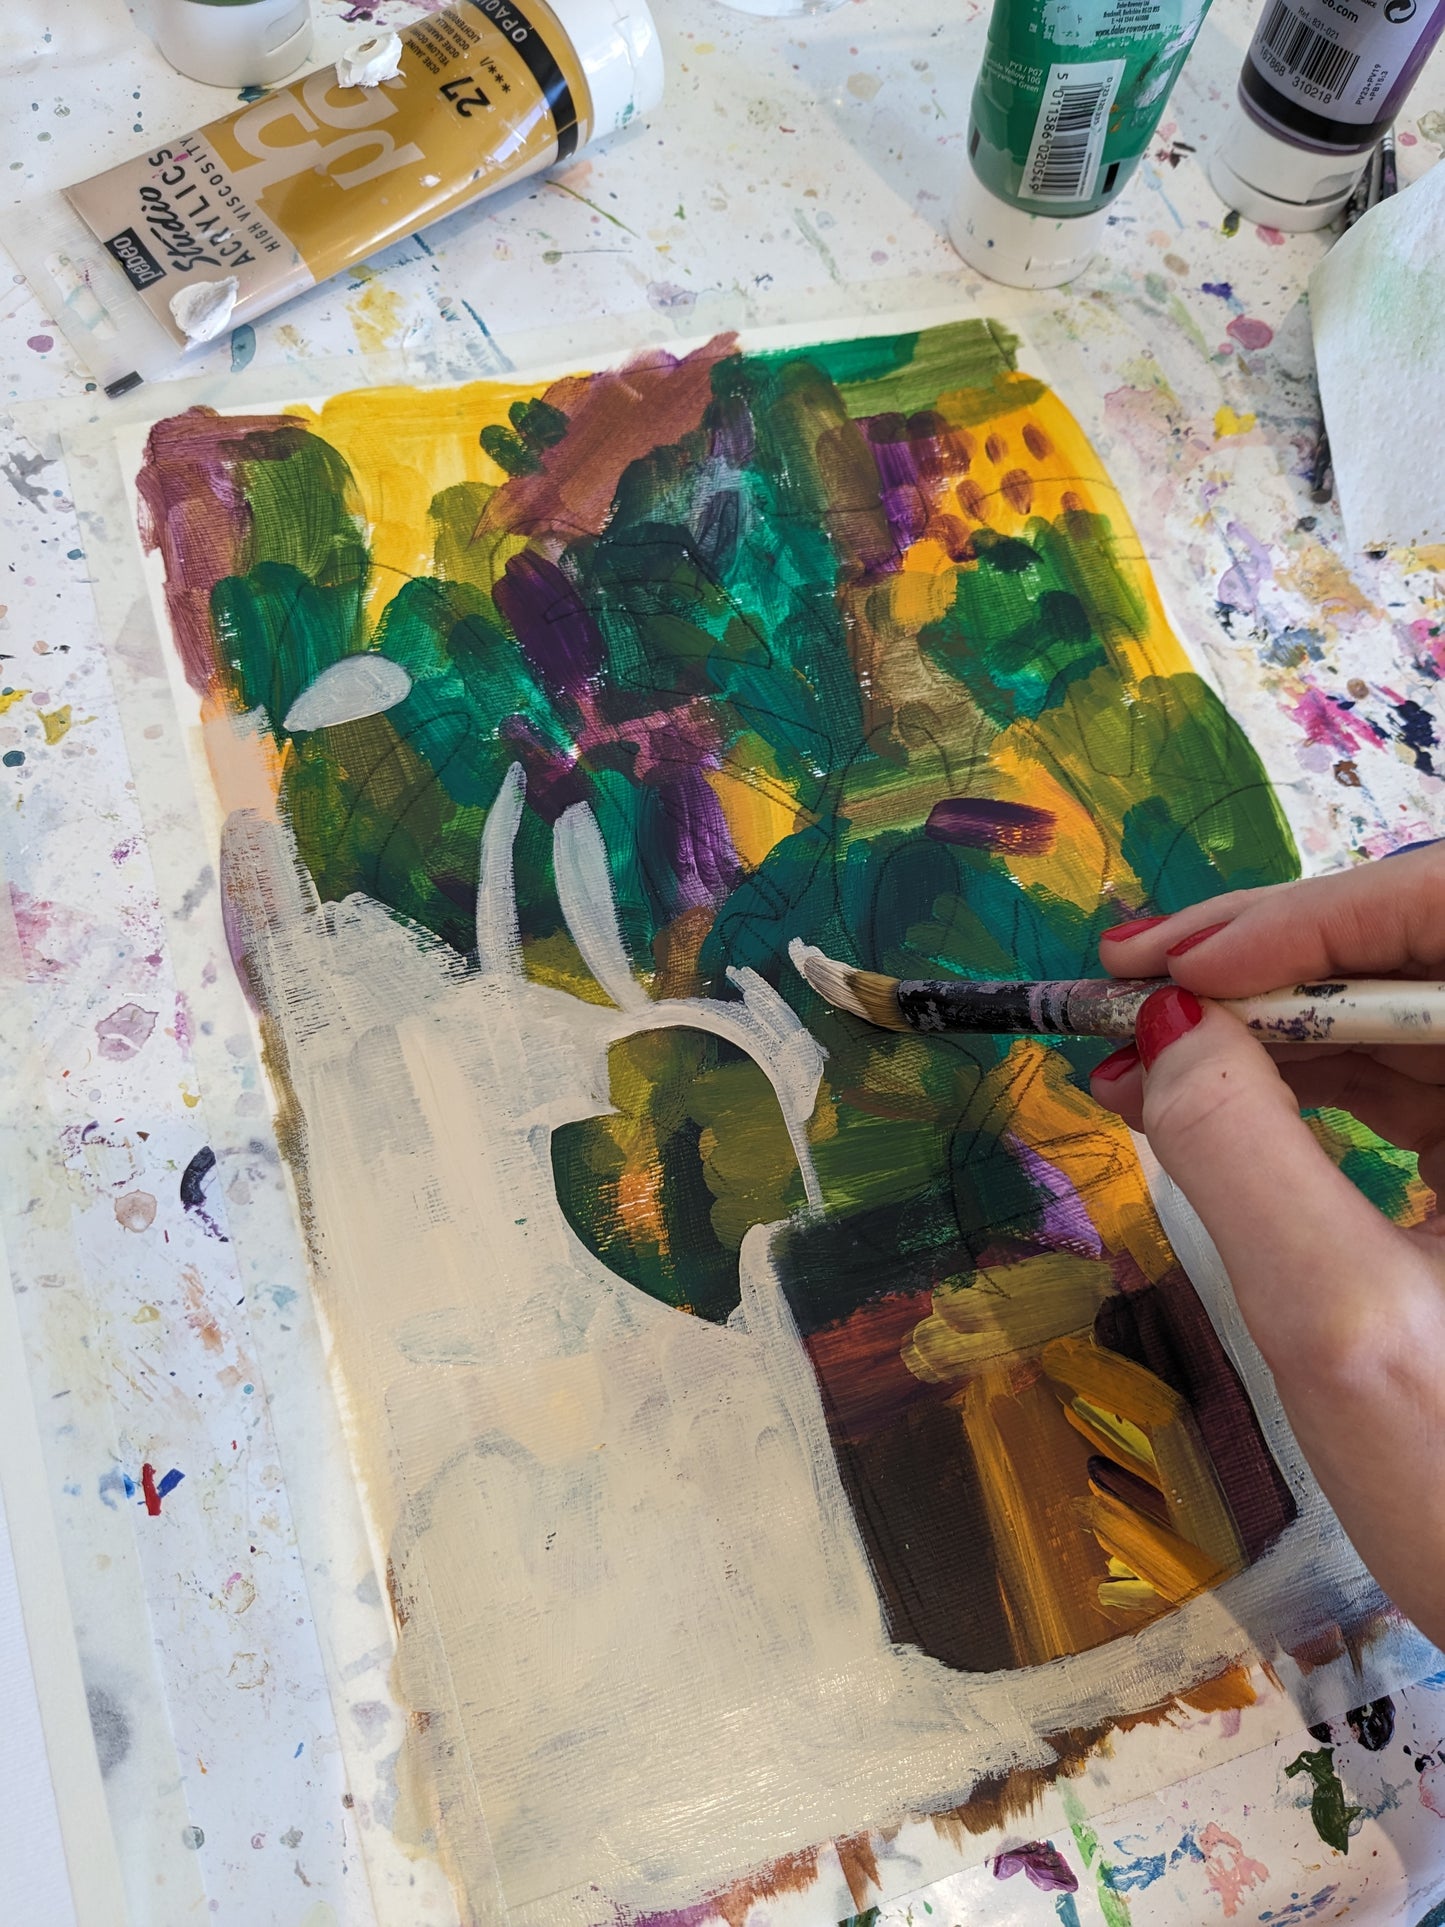 PAINTING WITH PATTERN - Painting workshop at The Howard Centre, Welwyn Garden City, Herts - 18th January 2024